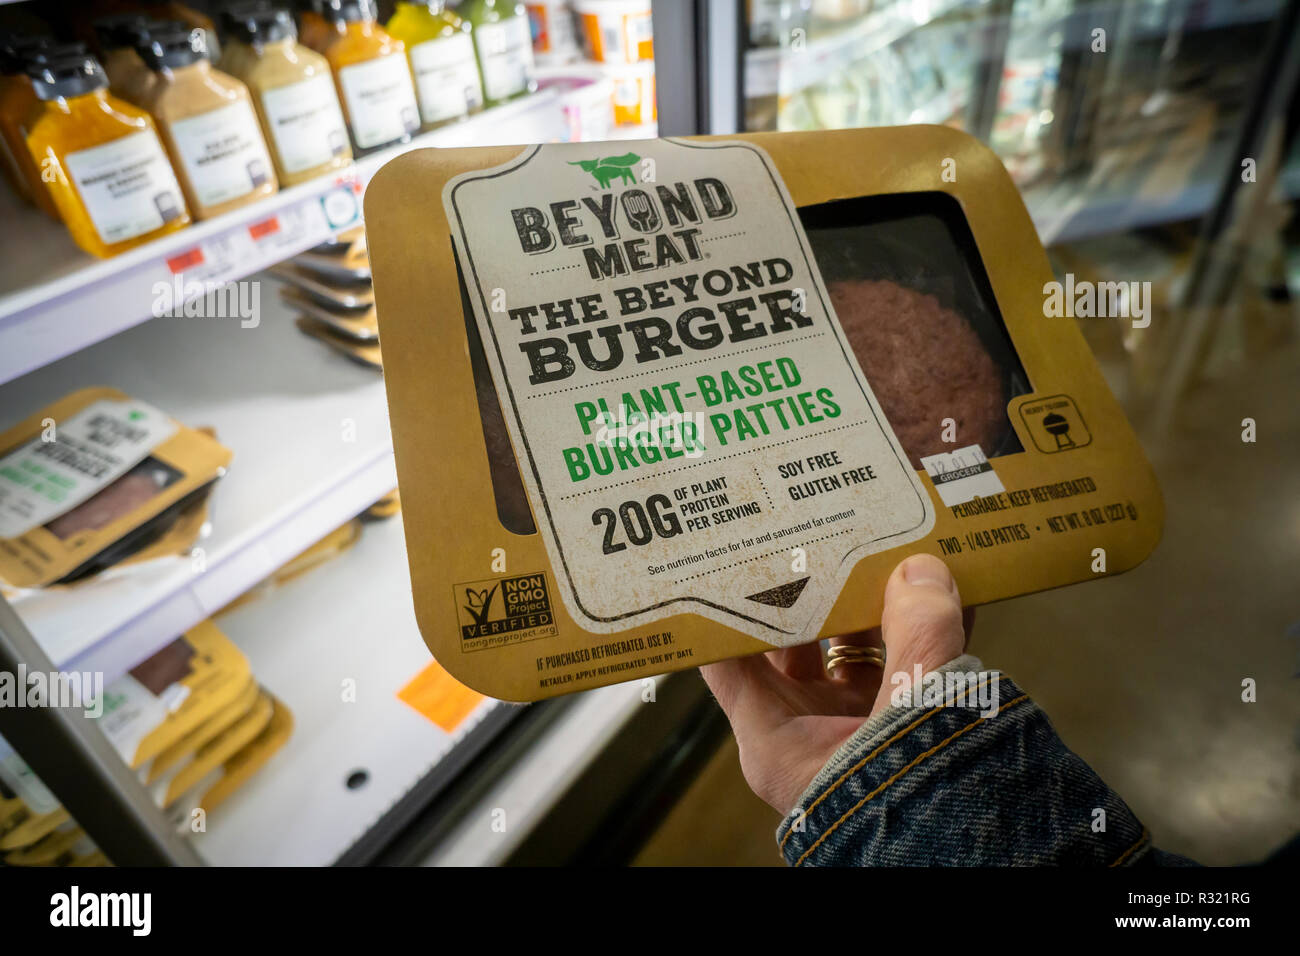 A shopper chooses a package of Beyond Meat from a freezer in a supermarket in New York on Monday, November 19, 2018. The plant-based protein start-up Beyond Meat has filed for an initial public offering for $100 million. The global market for meat substitutes is expected to grow to $6.4 billion by the year 2023, currently it is estimated at $4.6 billion. (© Richard B. Levine) Stock Photo